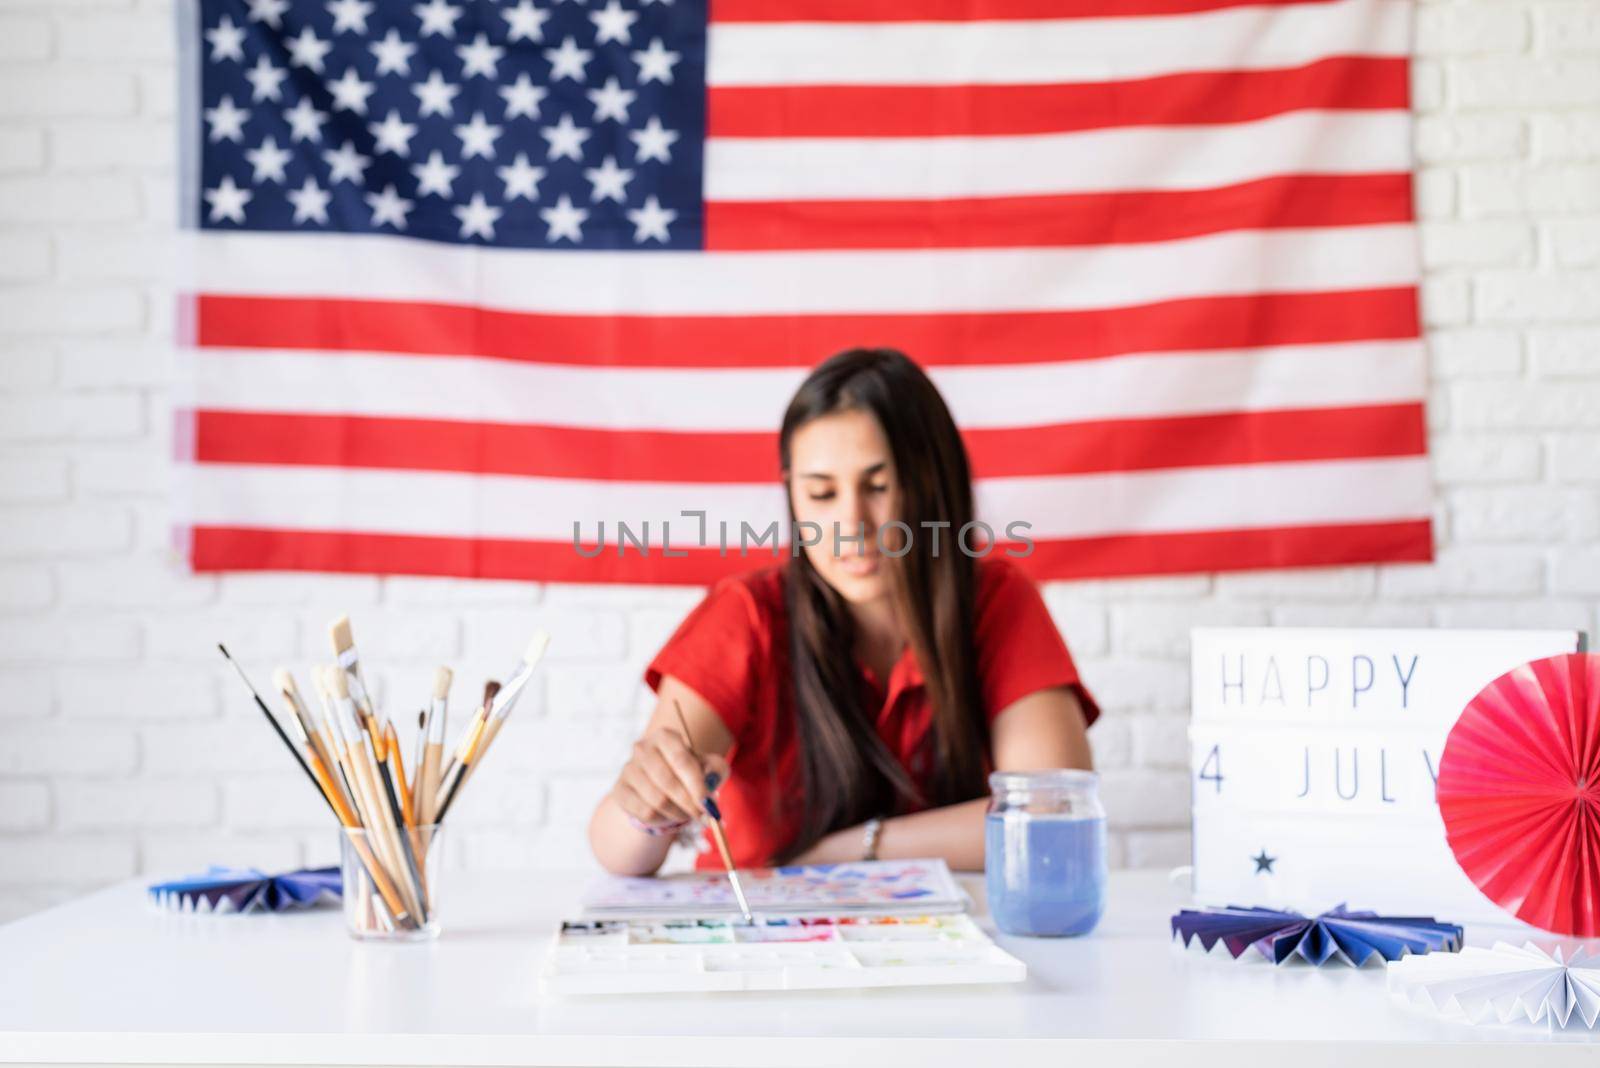 Independence day of the USA. Happy July 4th. Beautiful woman drawing a watercolor illustration for Independence day of the USA, selective focus, focus on foreground. Happy 4 July the text on the lightbox